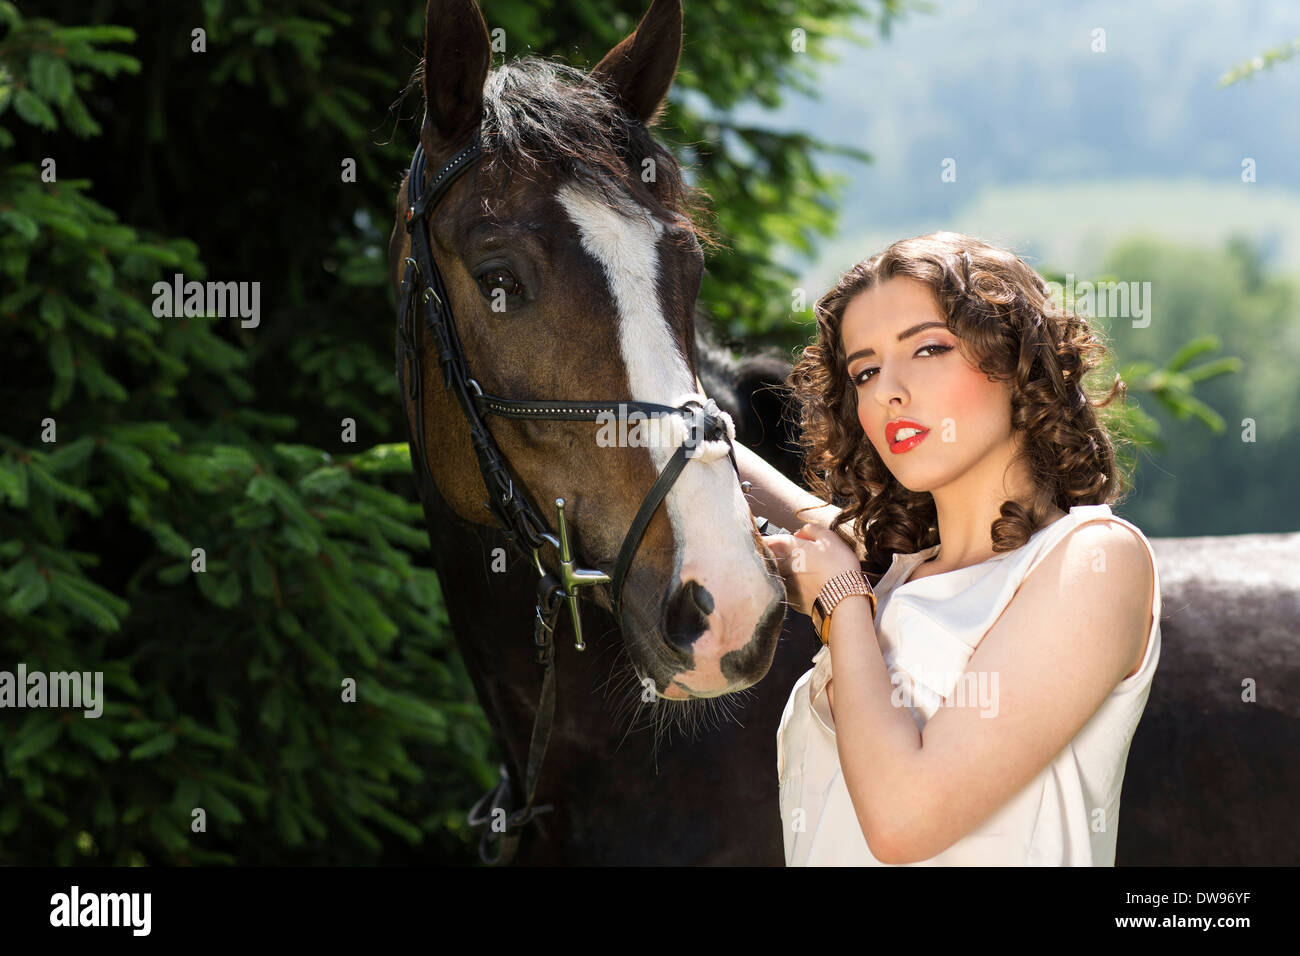 Young woman standing beside a horse Stock Photo